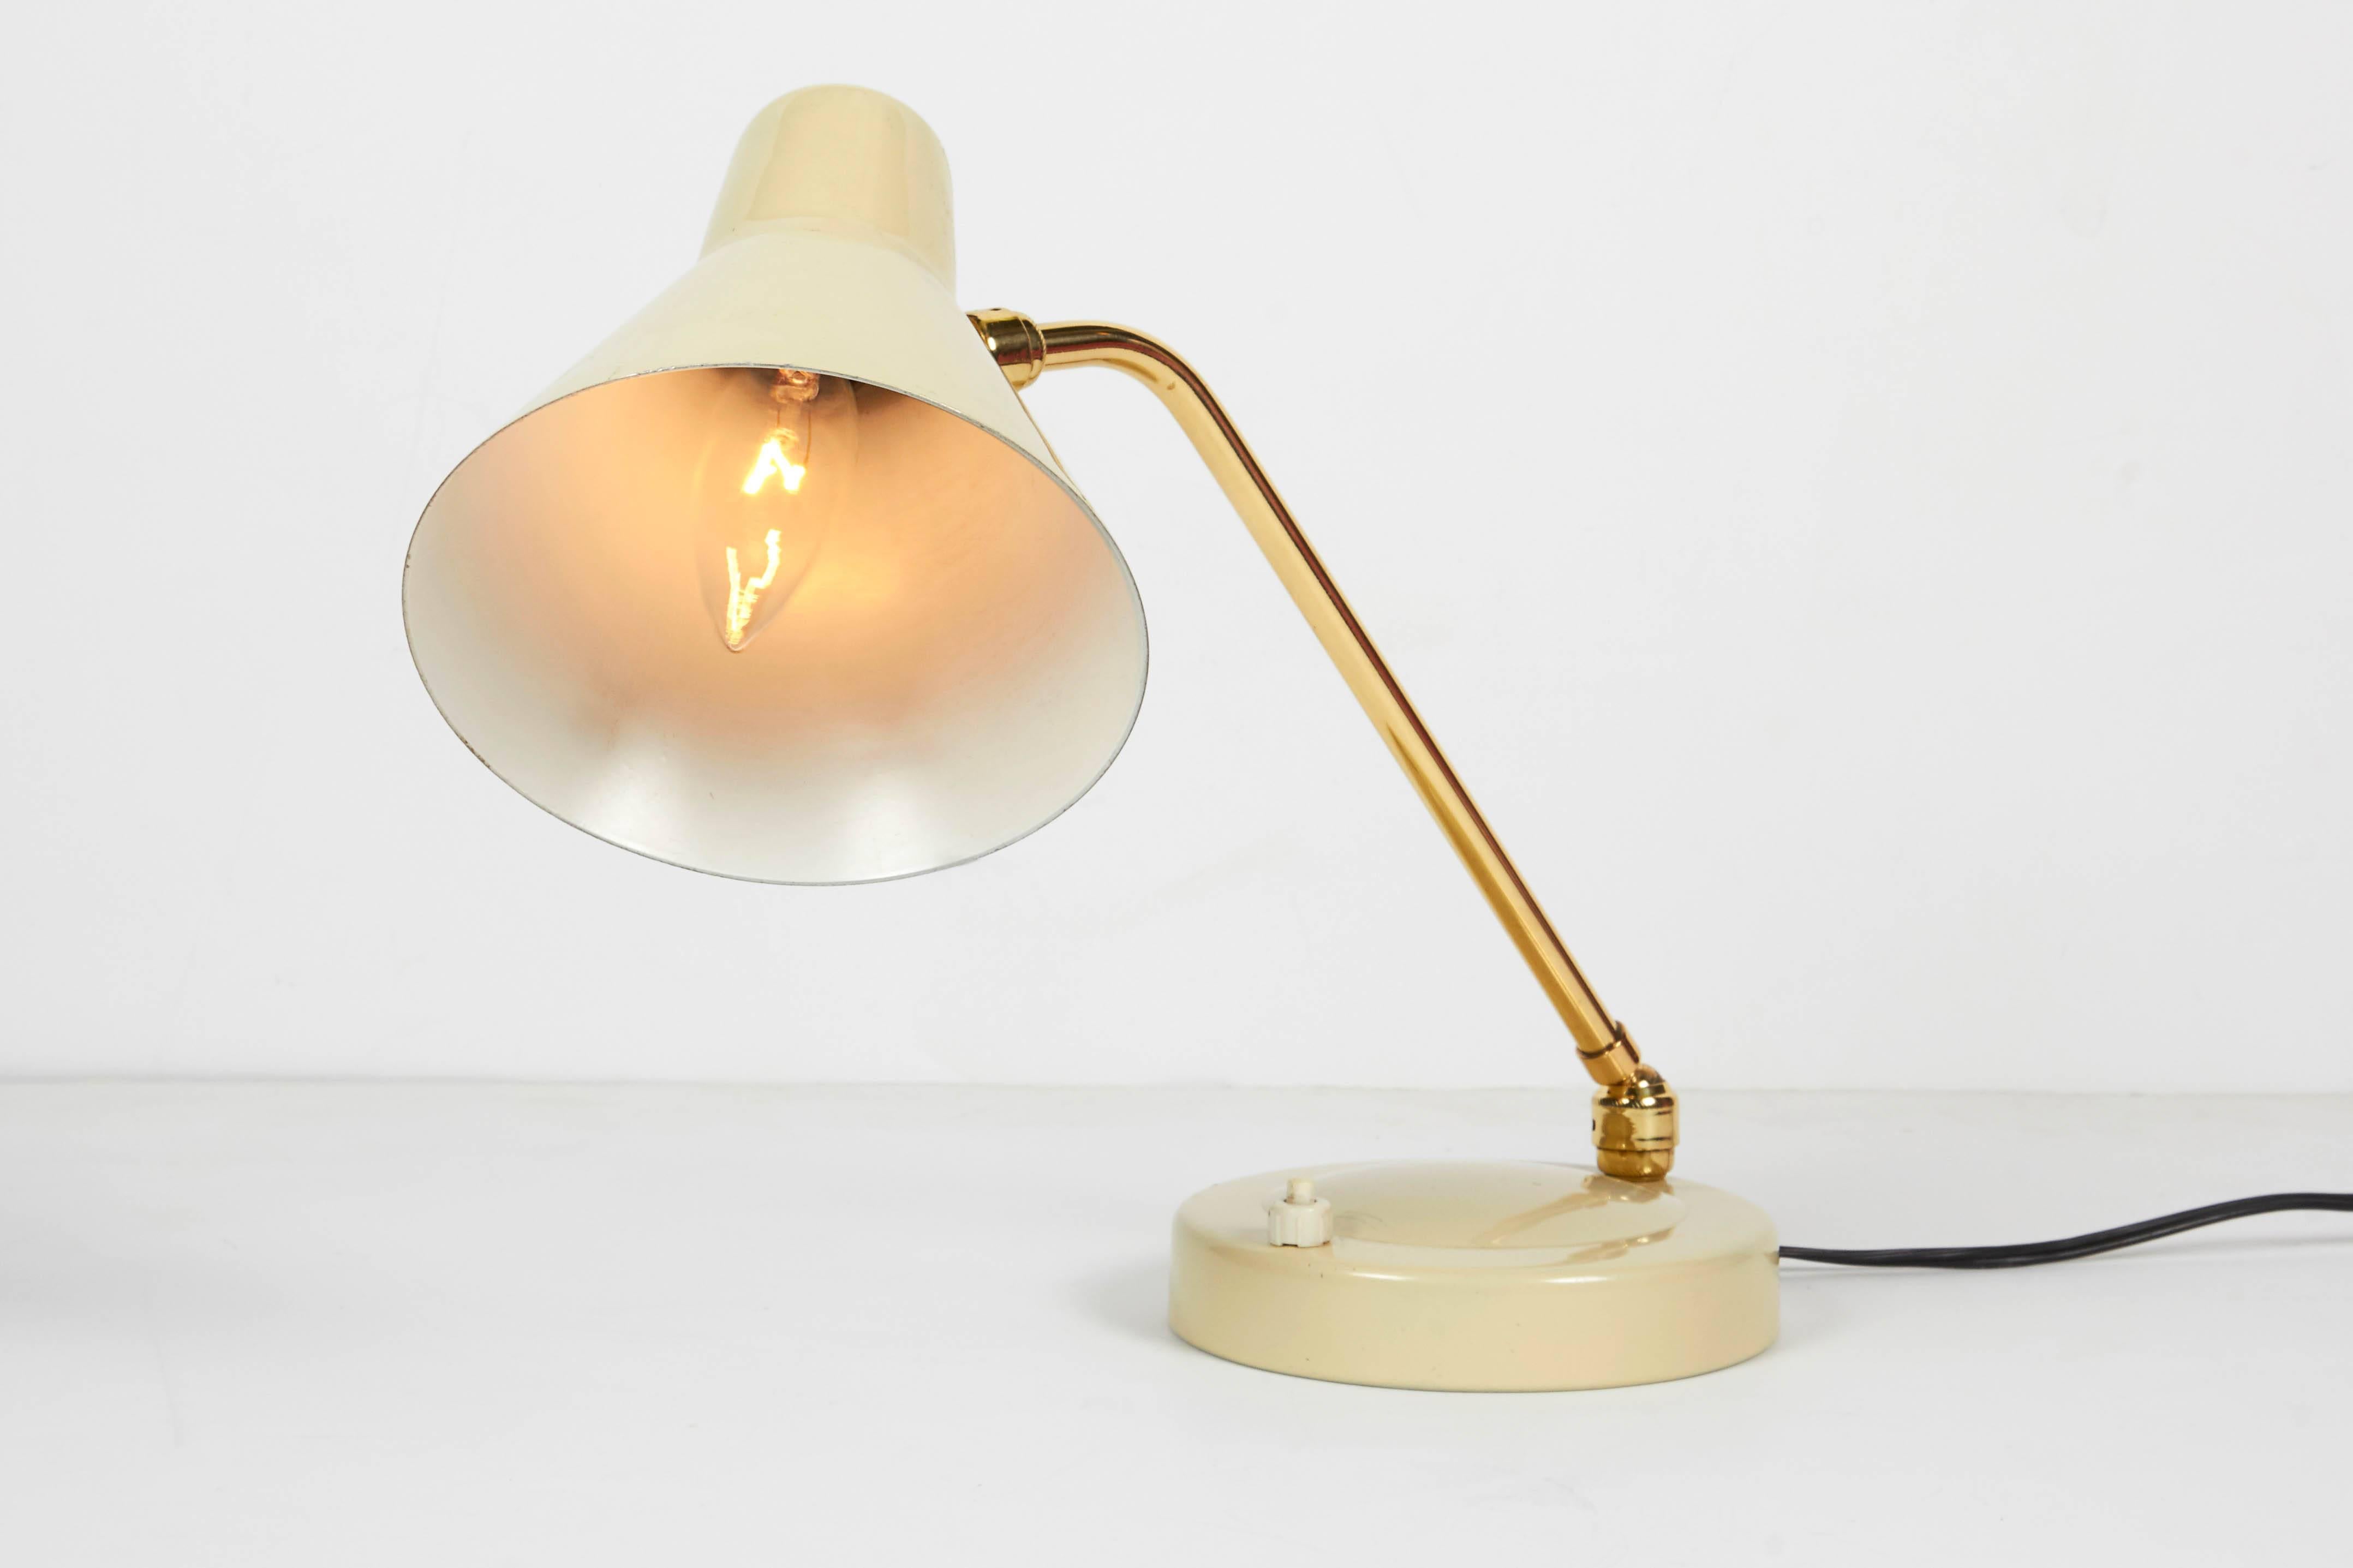 An Italian 1950s desk table lamp. Shade and base in an ivory enamel. Articulated brass support rod is adjustable along with the shade angle. Takes a candelabra bulb.